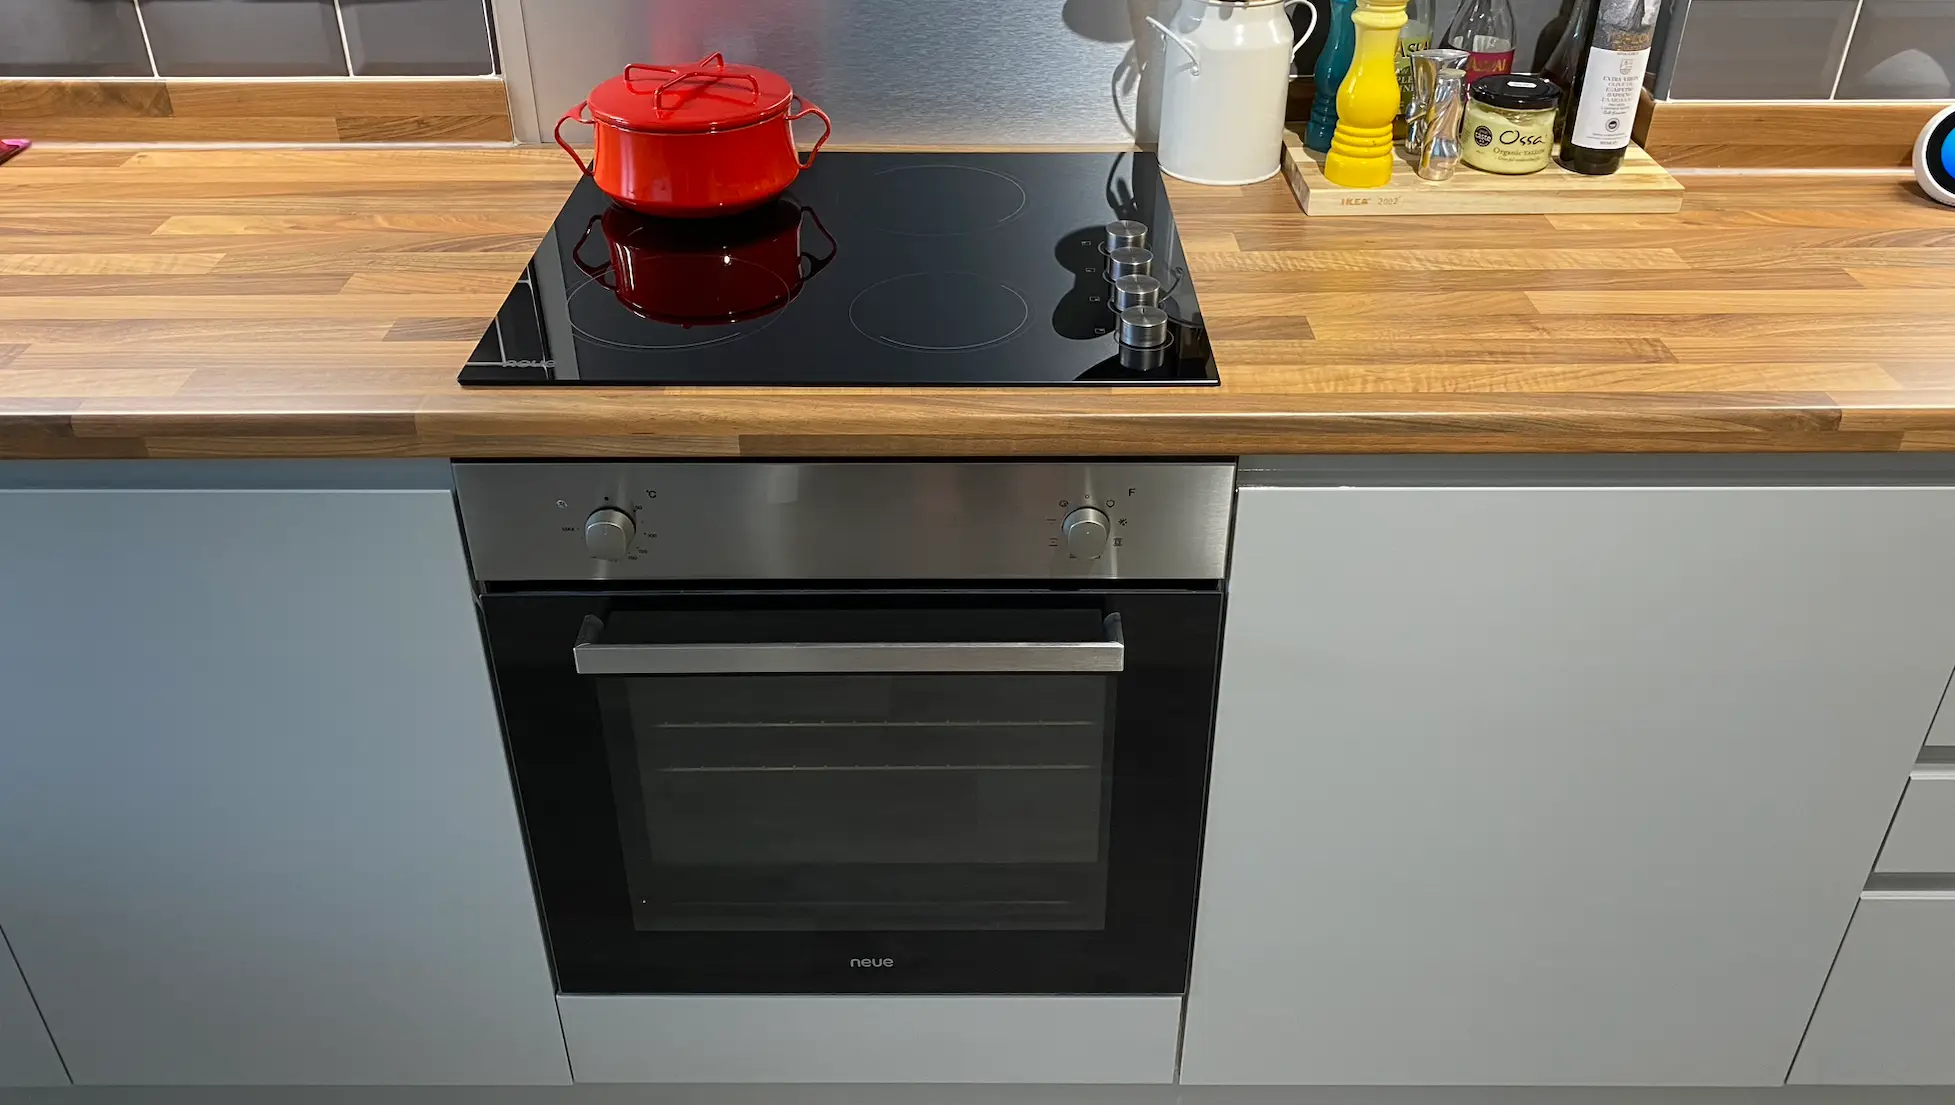 Repair or install an electric / induction hob cost